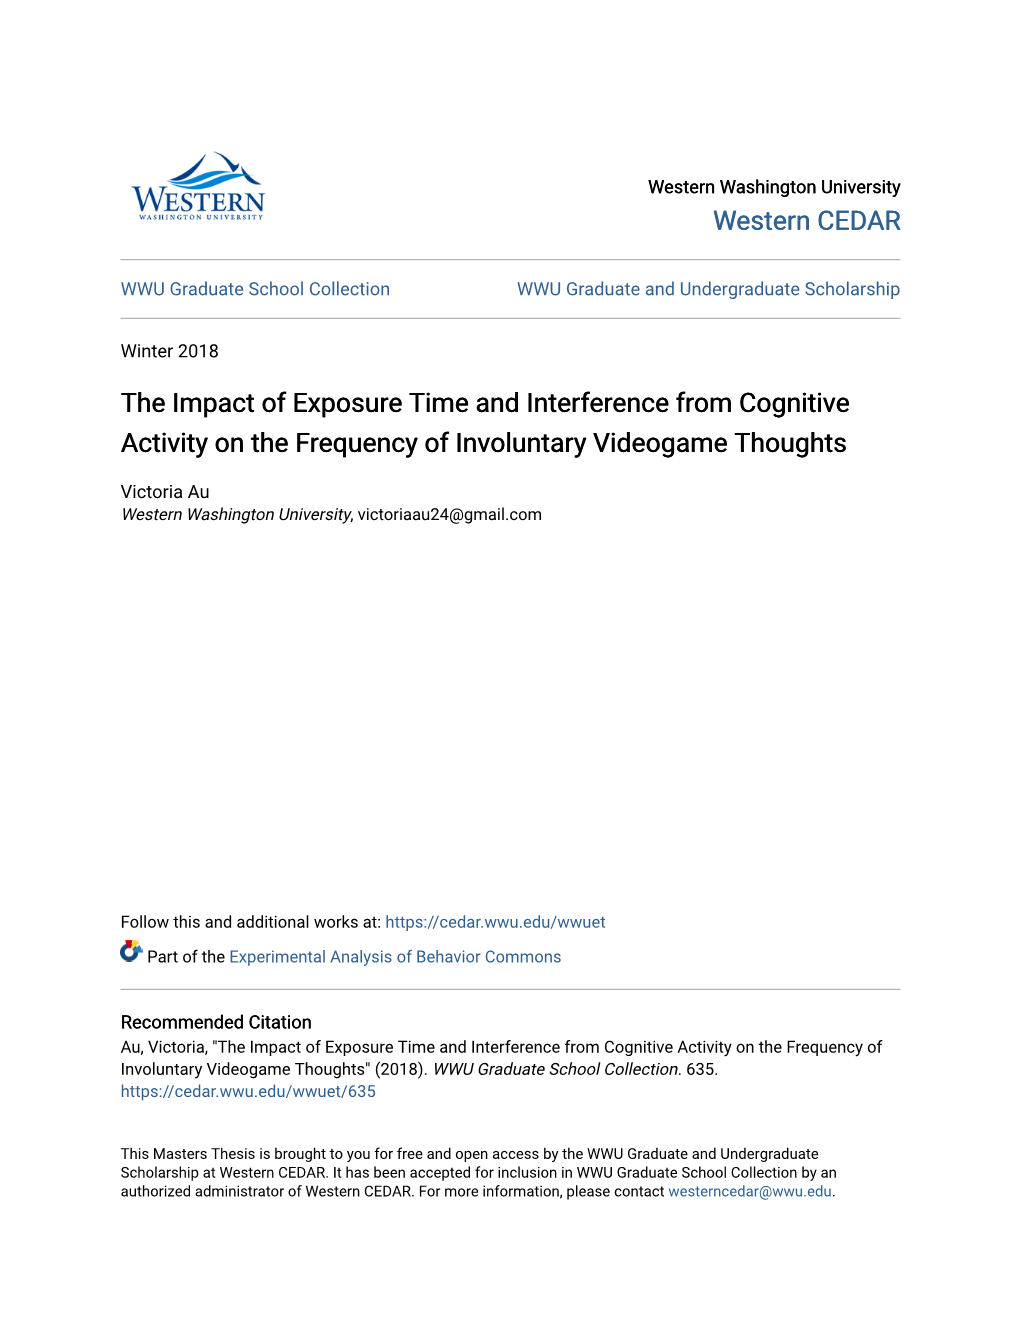 The Impact of Exposure Time and Interference from Cognitive Activity on the Frequency of Involuntary Videogame Thoughts